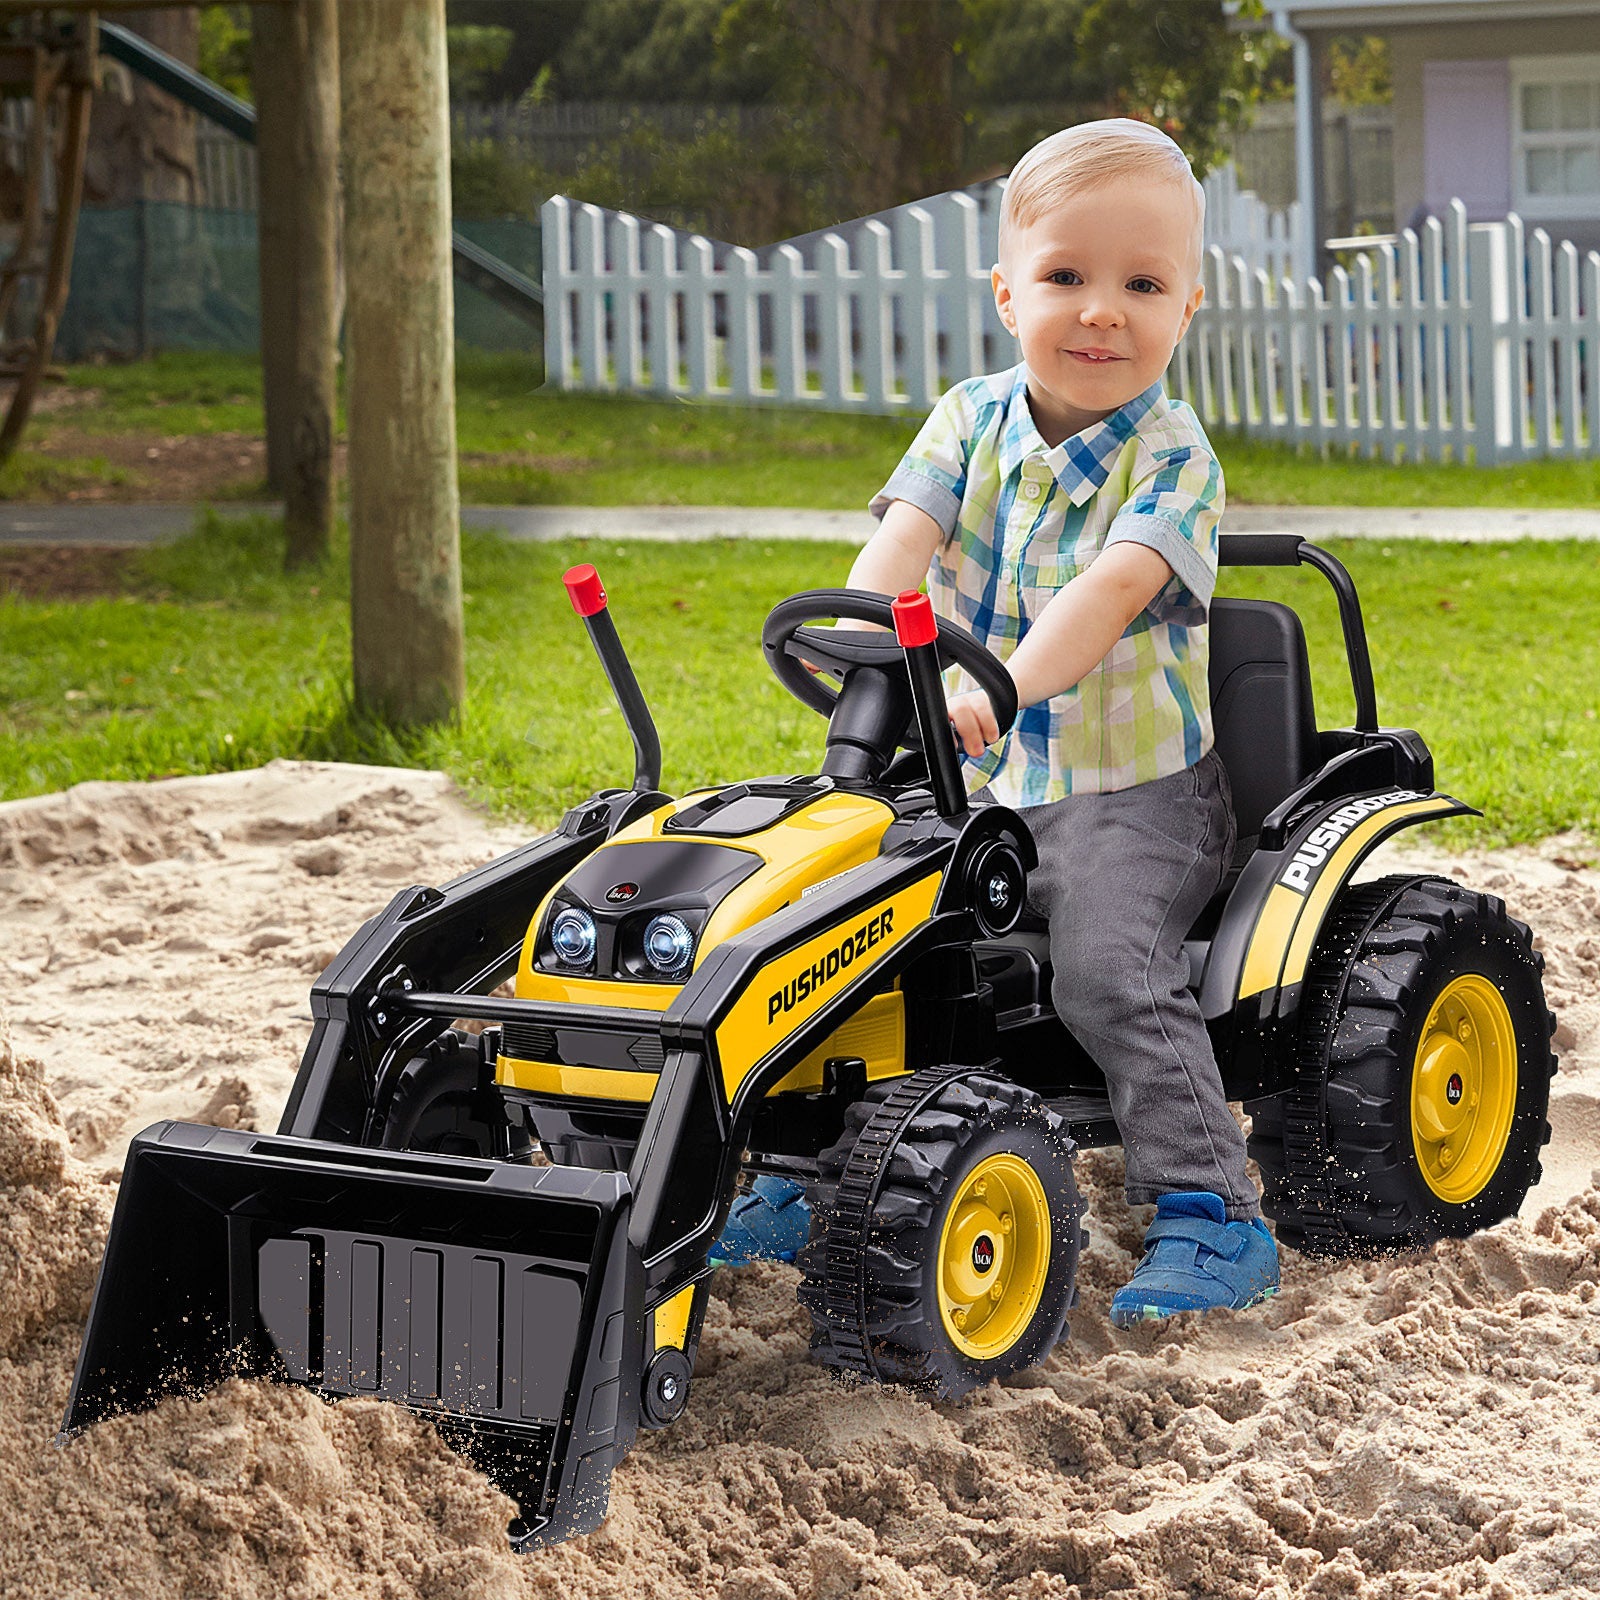 Kids Digger Ride On Excavator 6V Battery Powered Construction Tractor Music Headlight Moving Forward Backward Gear for 3-5 years old Yellow-1